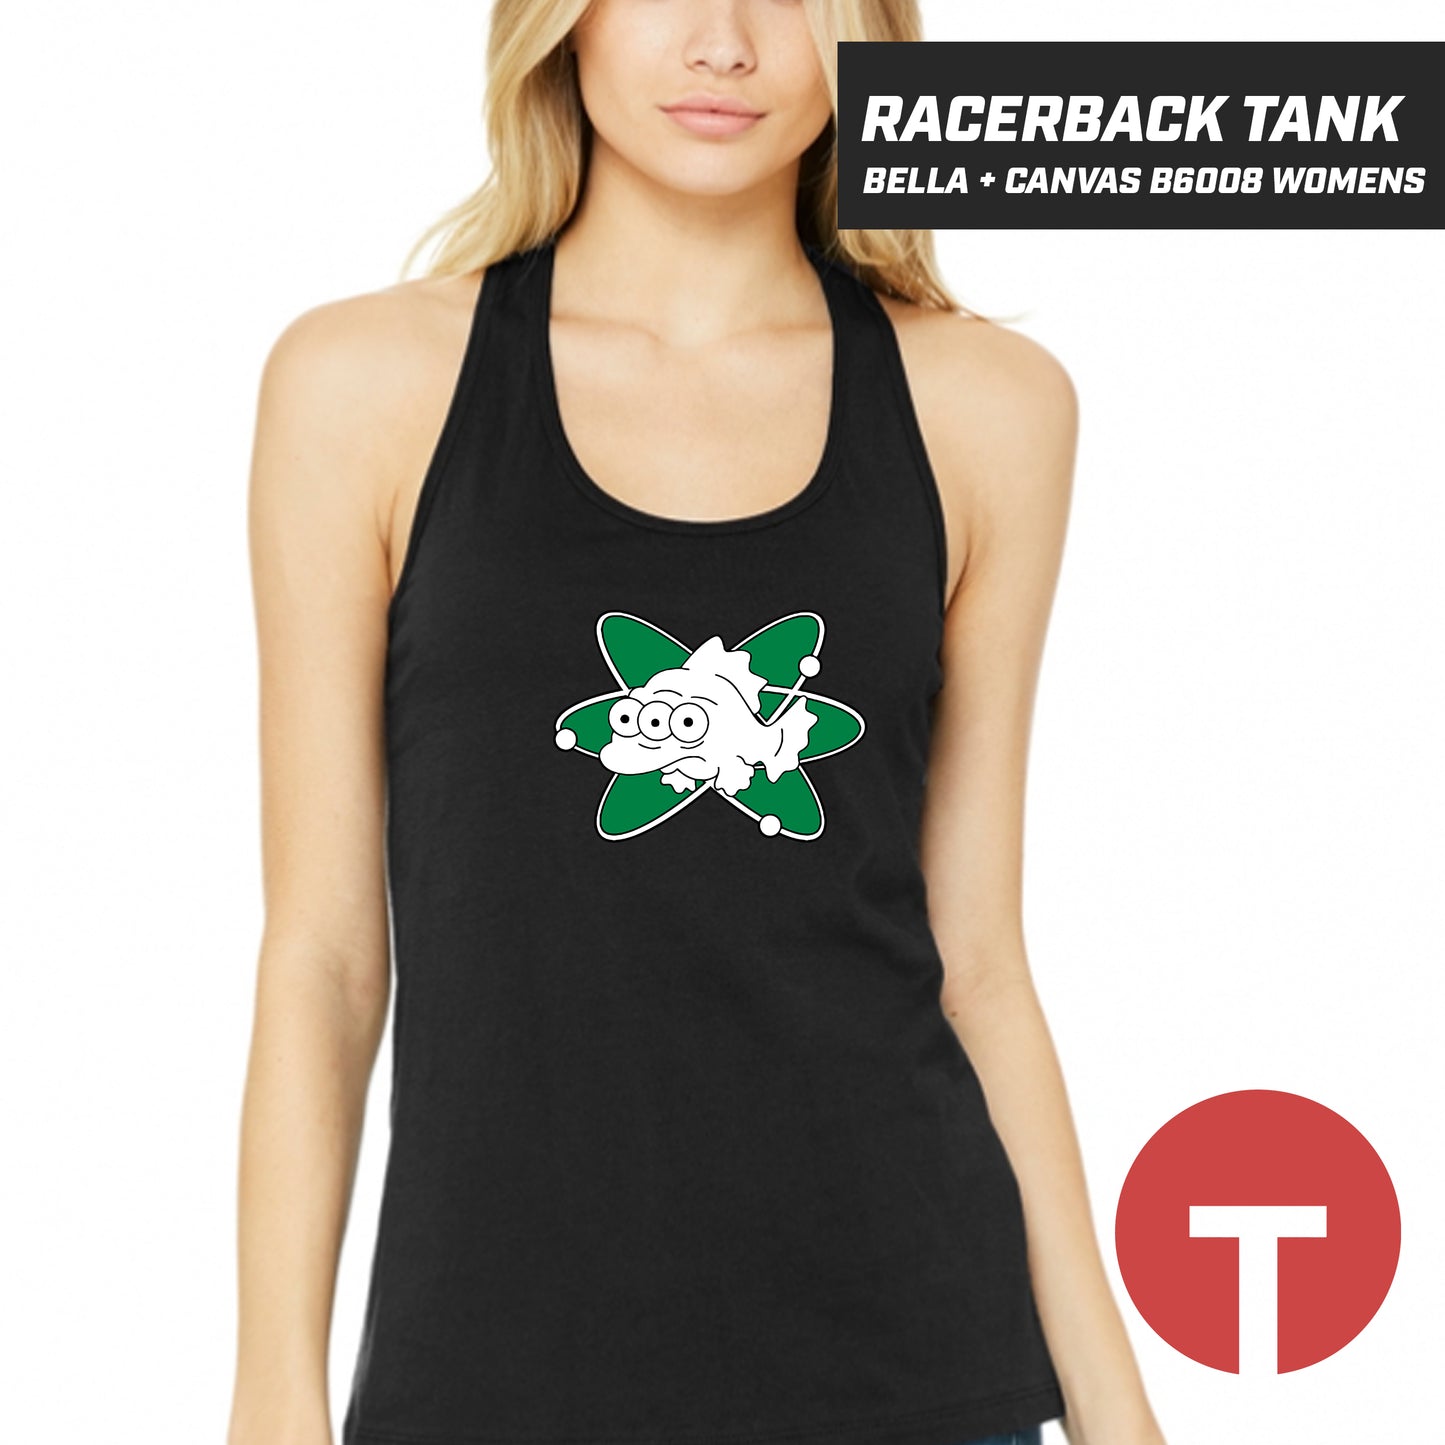 Isotopes - Bella + Canvas B6008 Women's Jersey Racerback Tank